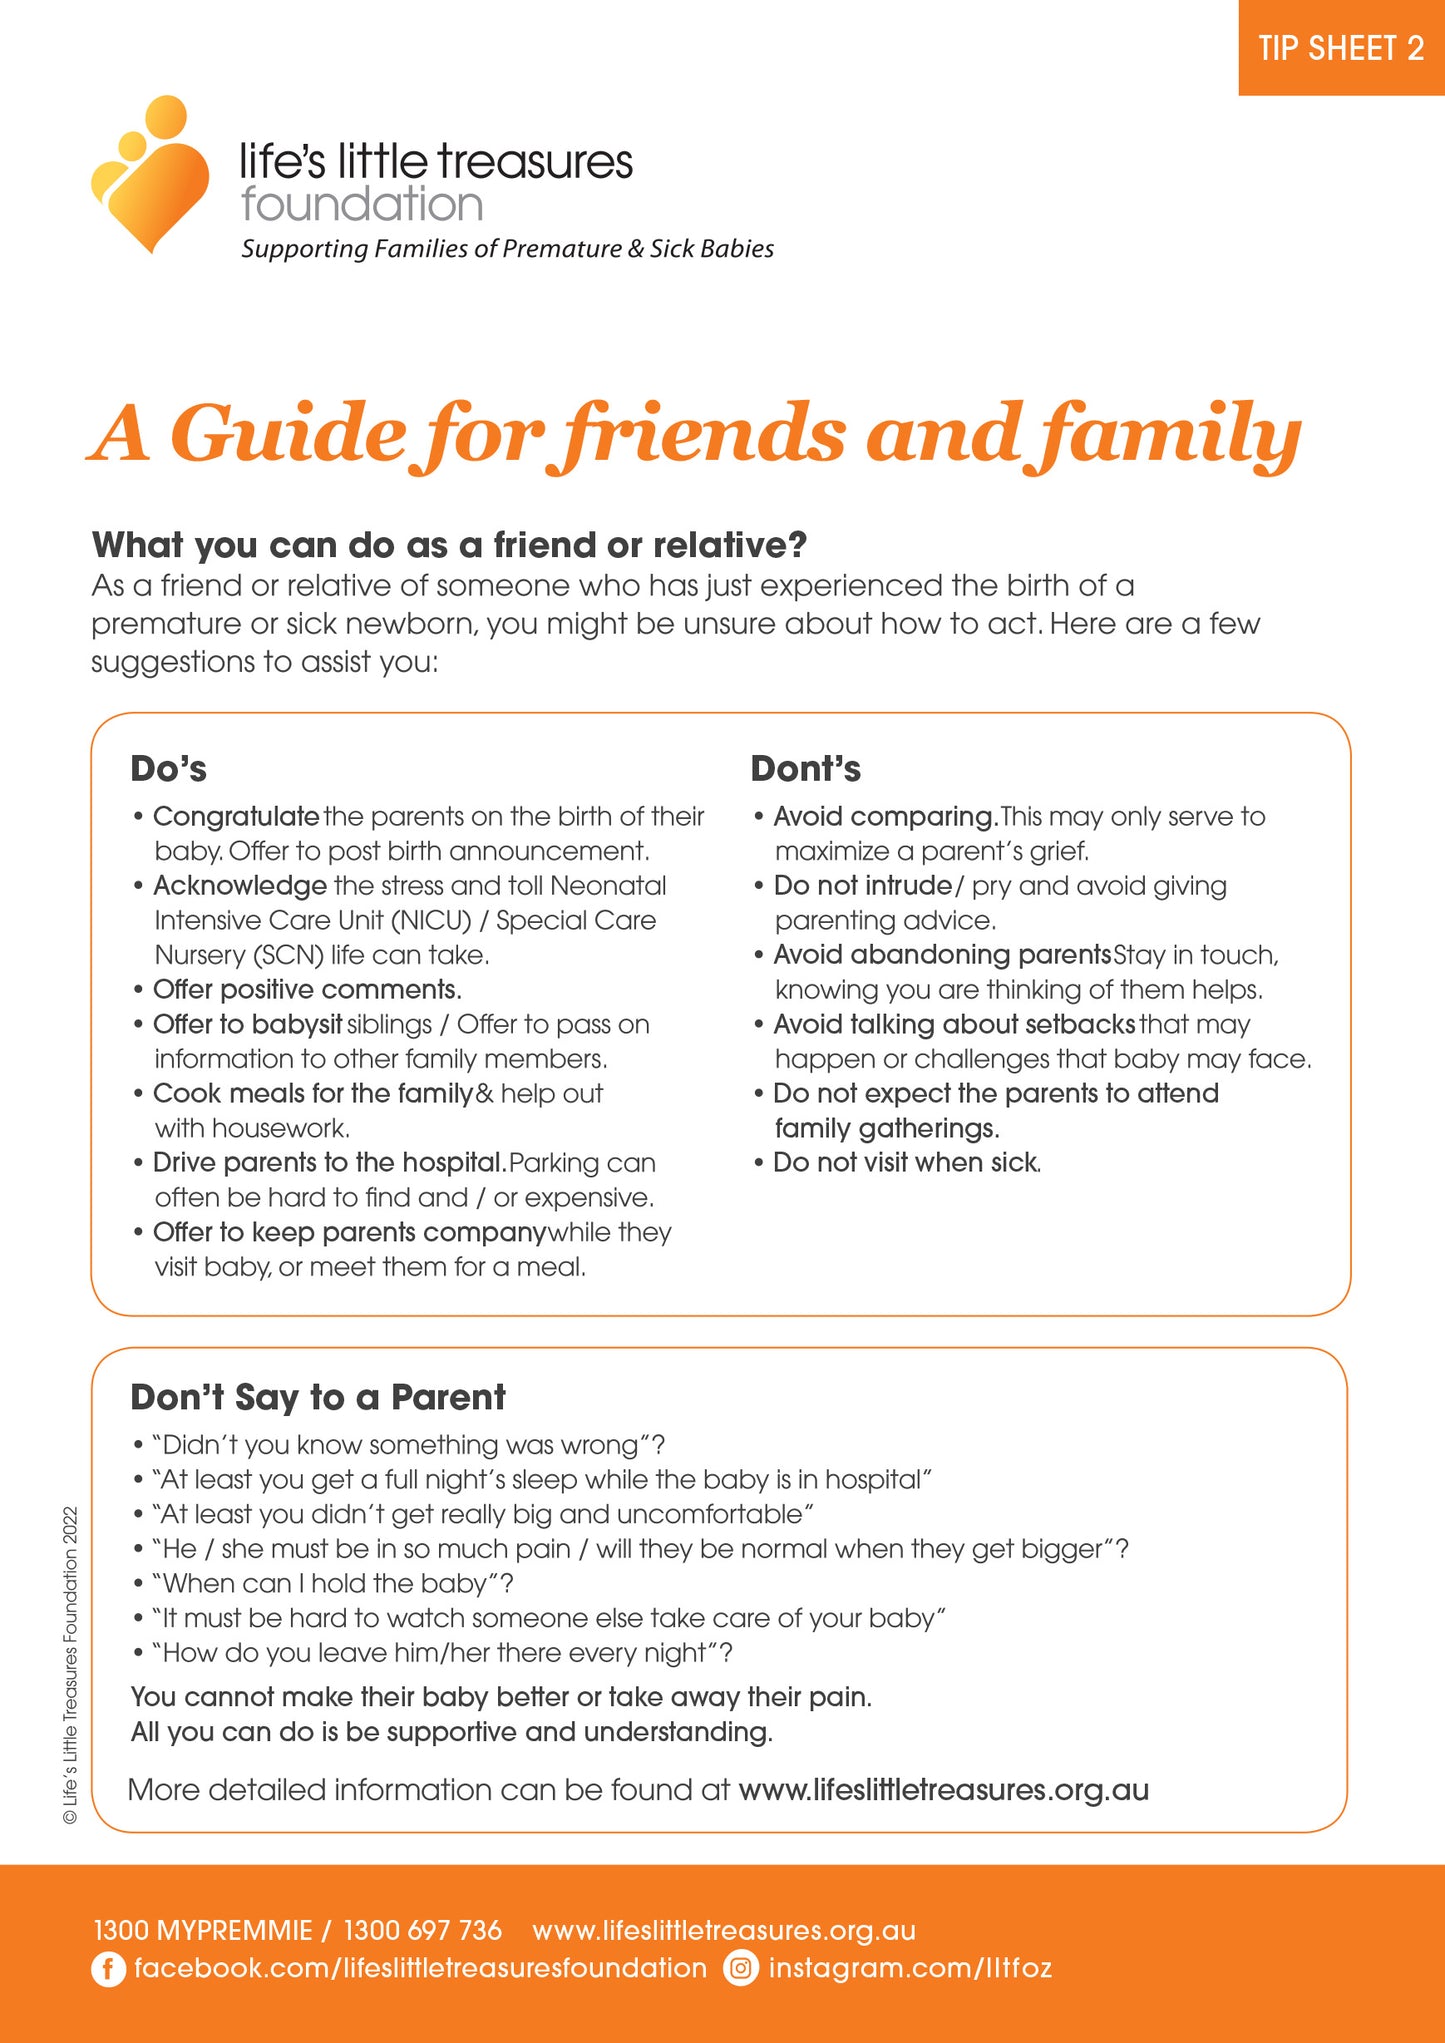 Tip Sheet 2 - Tips for family and friends